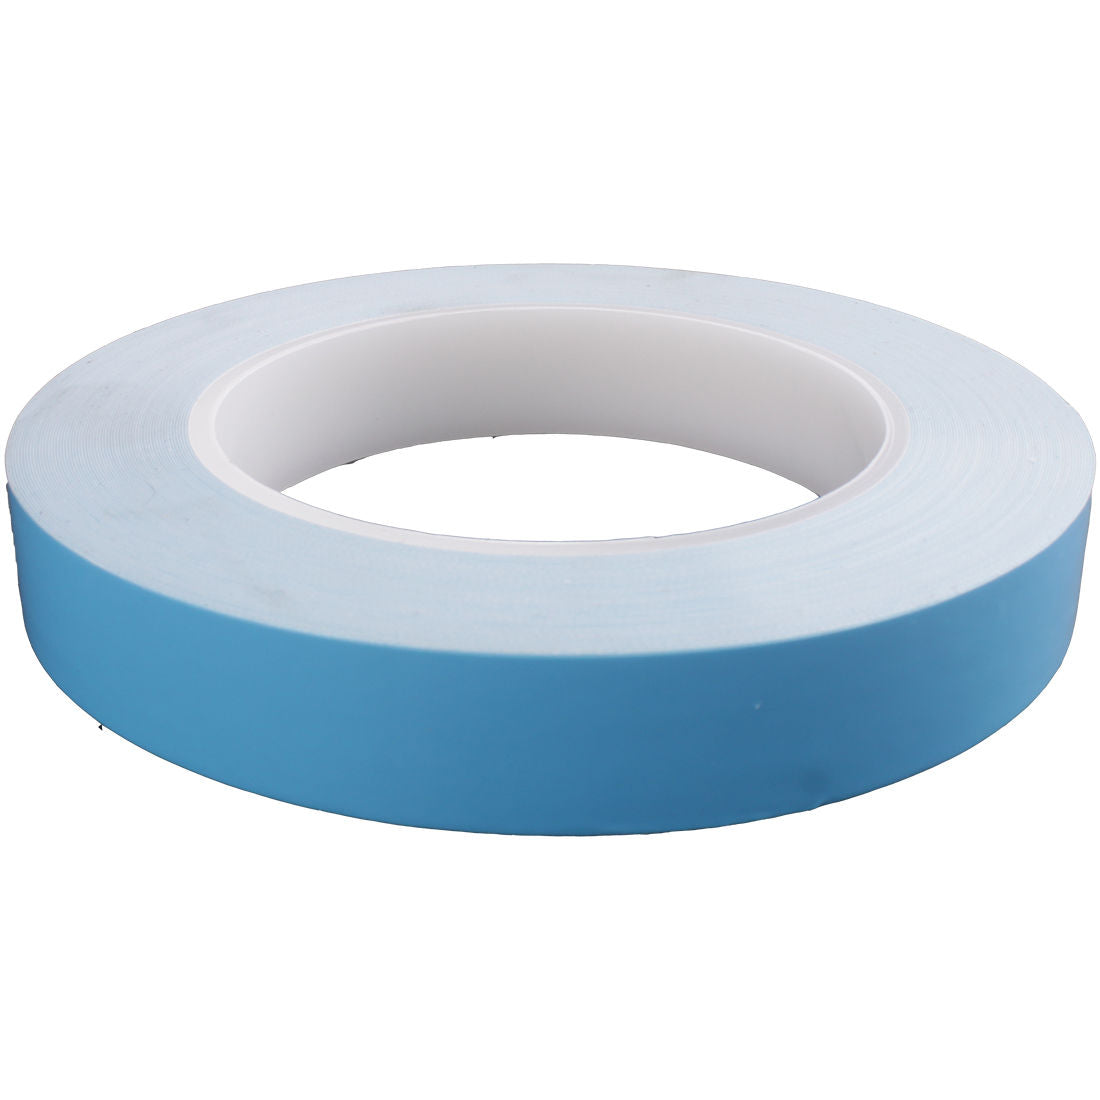 thermal tape double sideed home depot